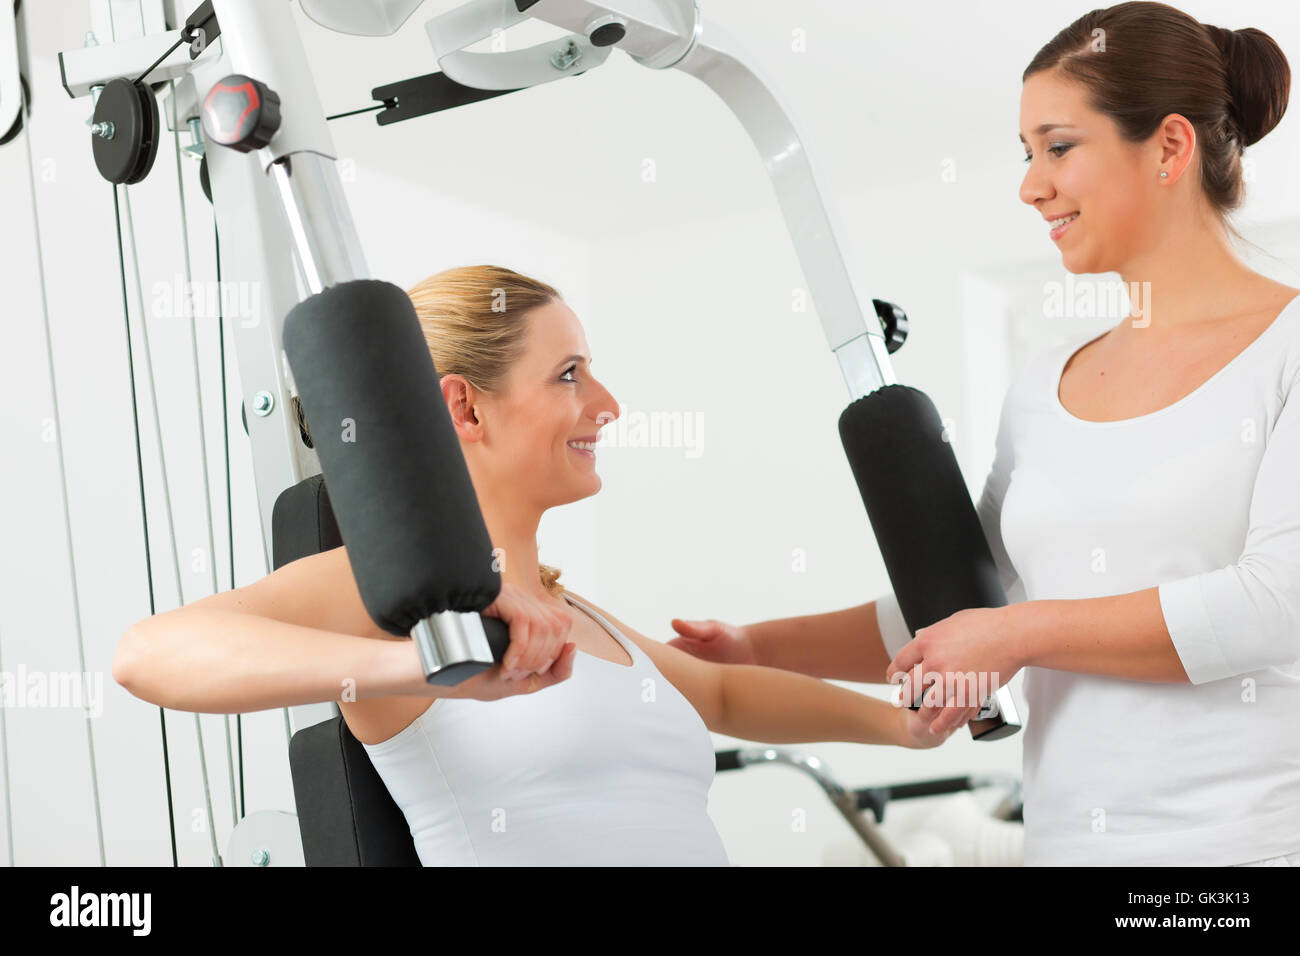 patient physiotherapy therapist Stock Photo